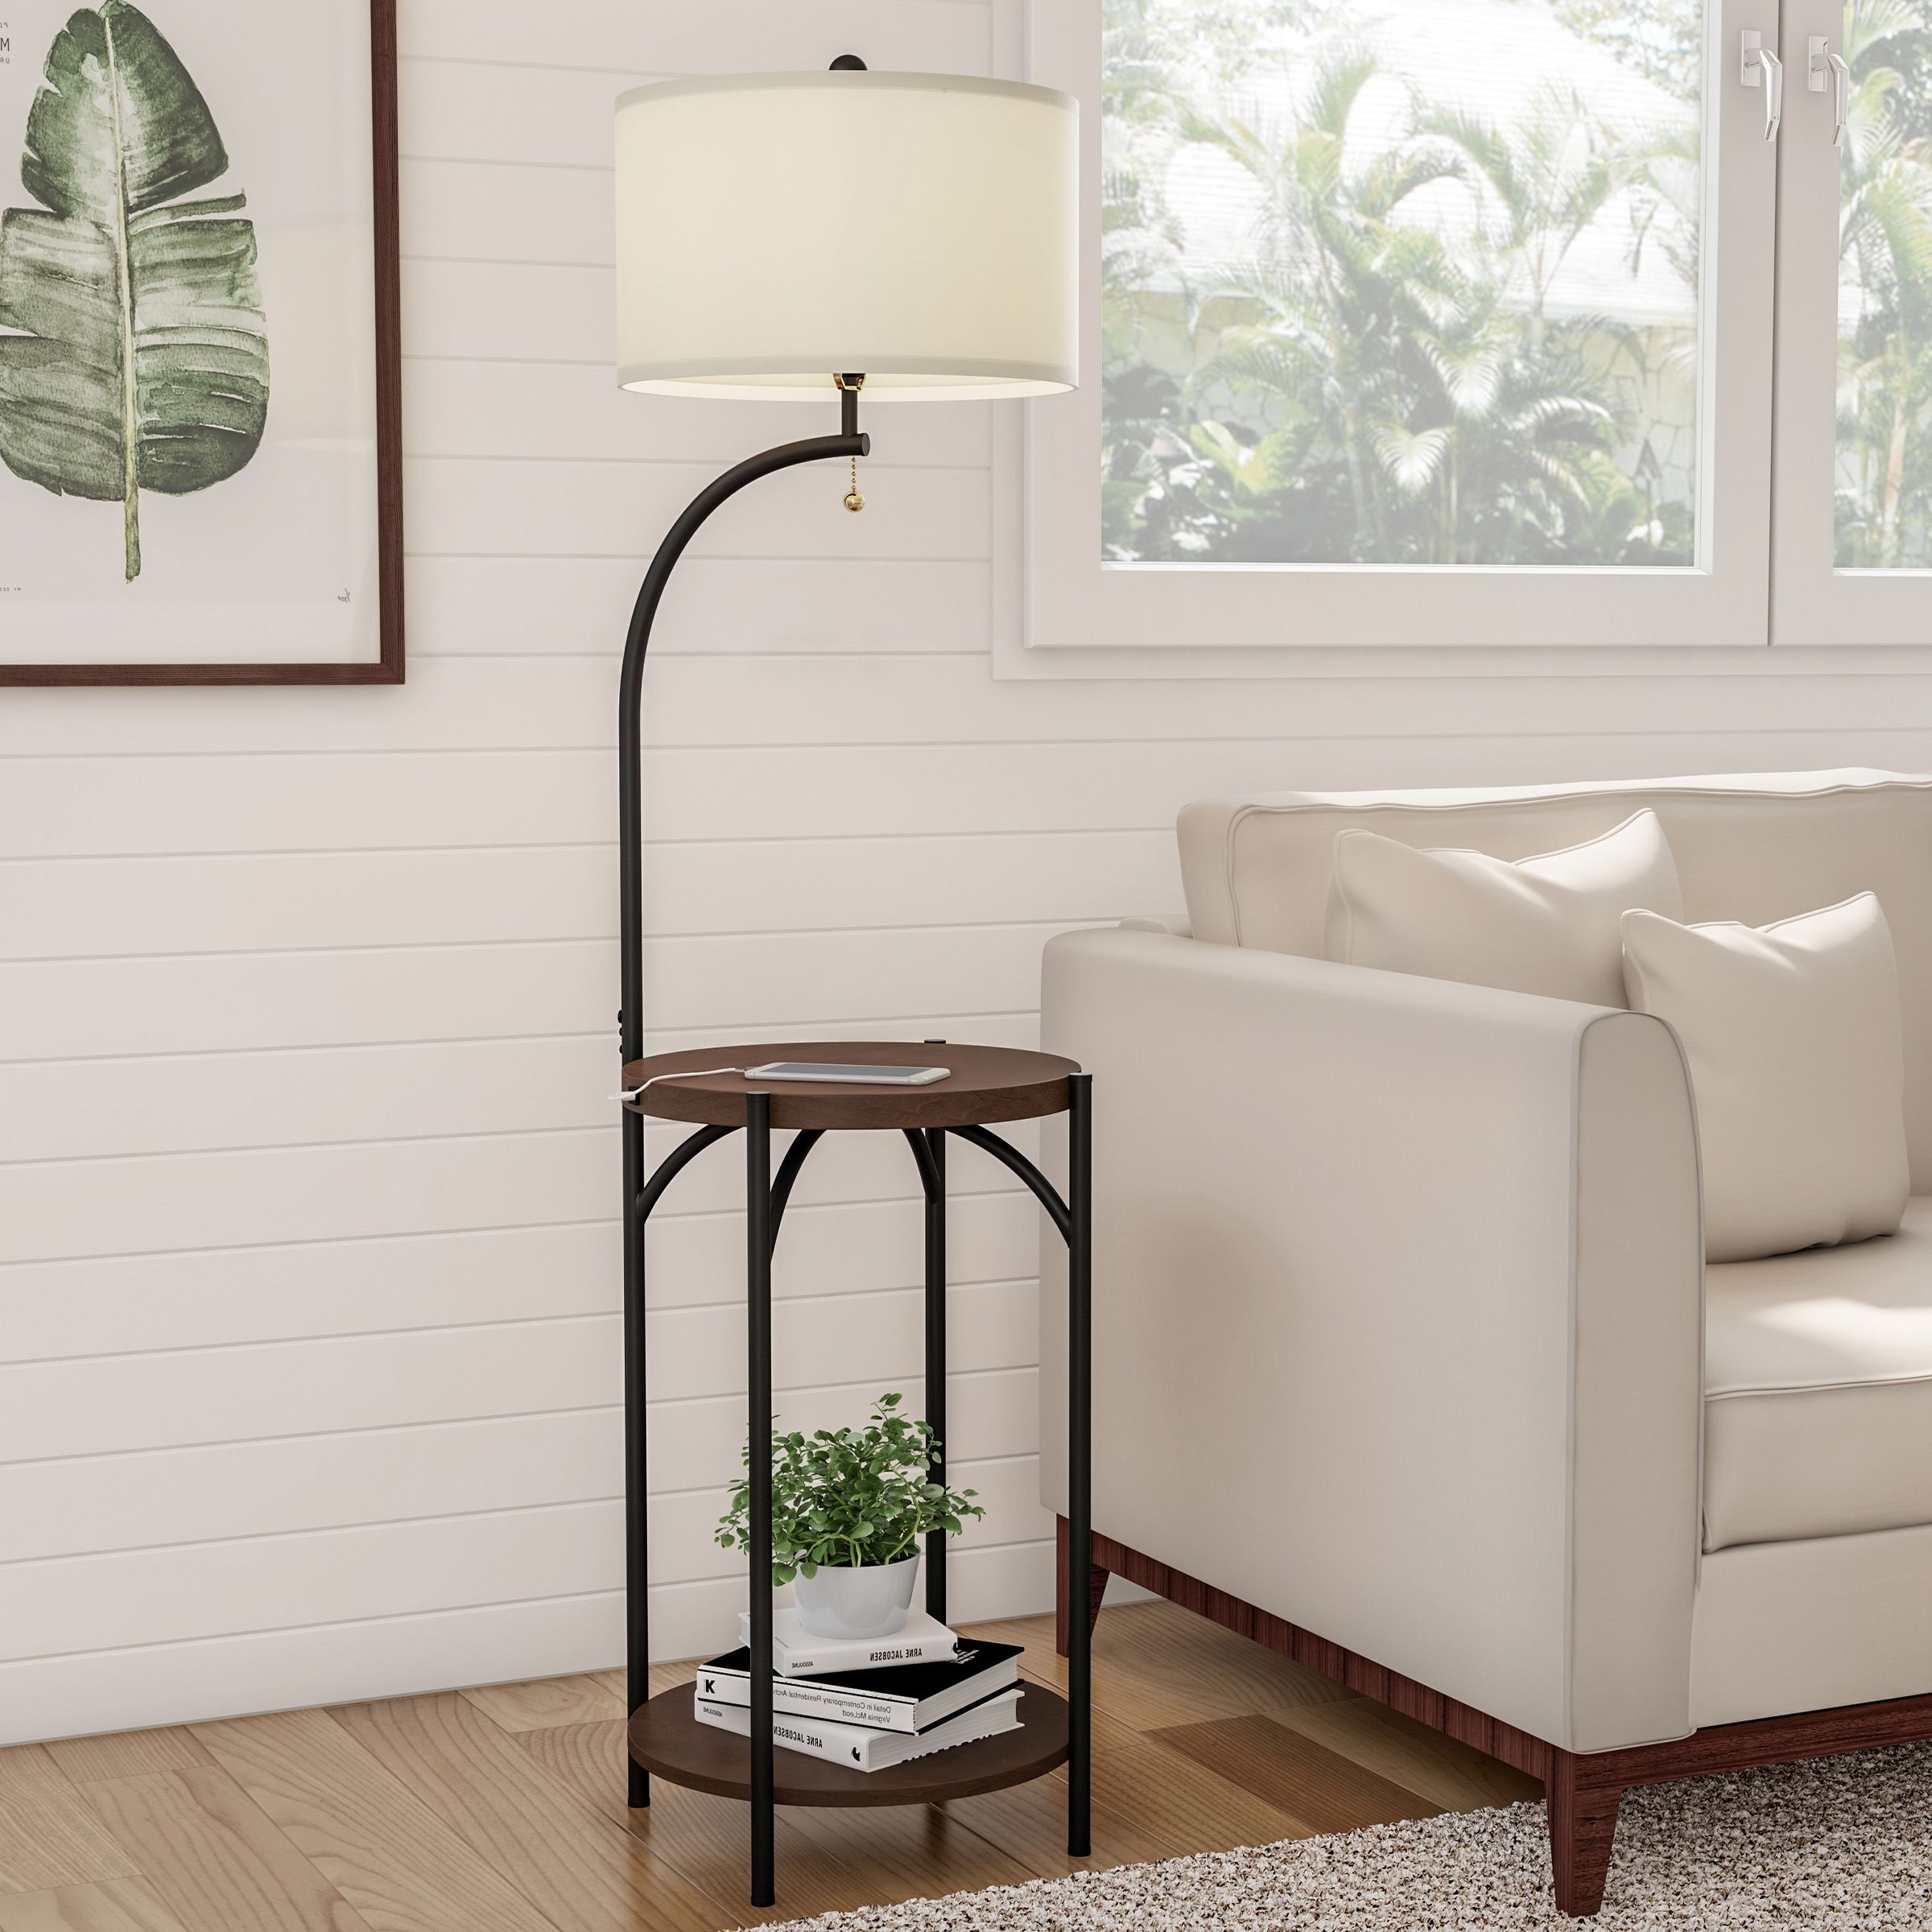 Floor Lamp With Table – Modern Rustic Side Table With Usb Charging Port,  Led Bulb, And Drum Shaped Shade (View 14 of 15)